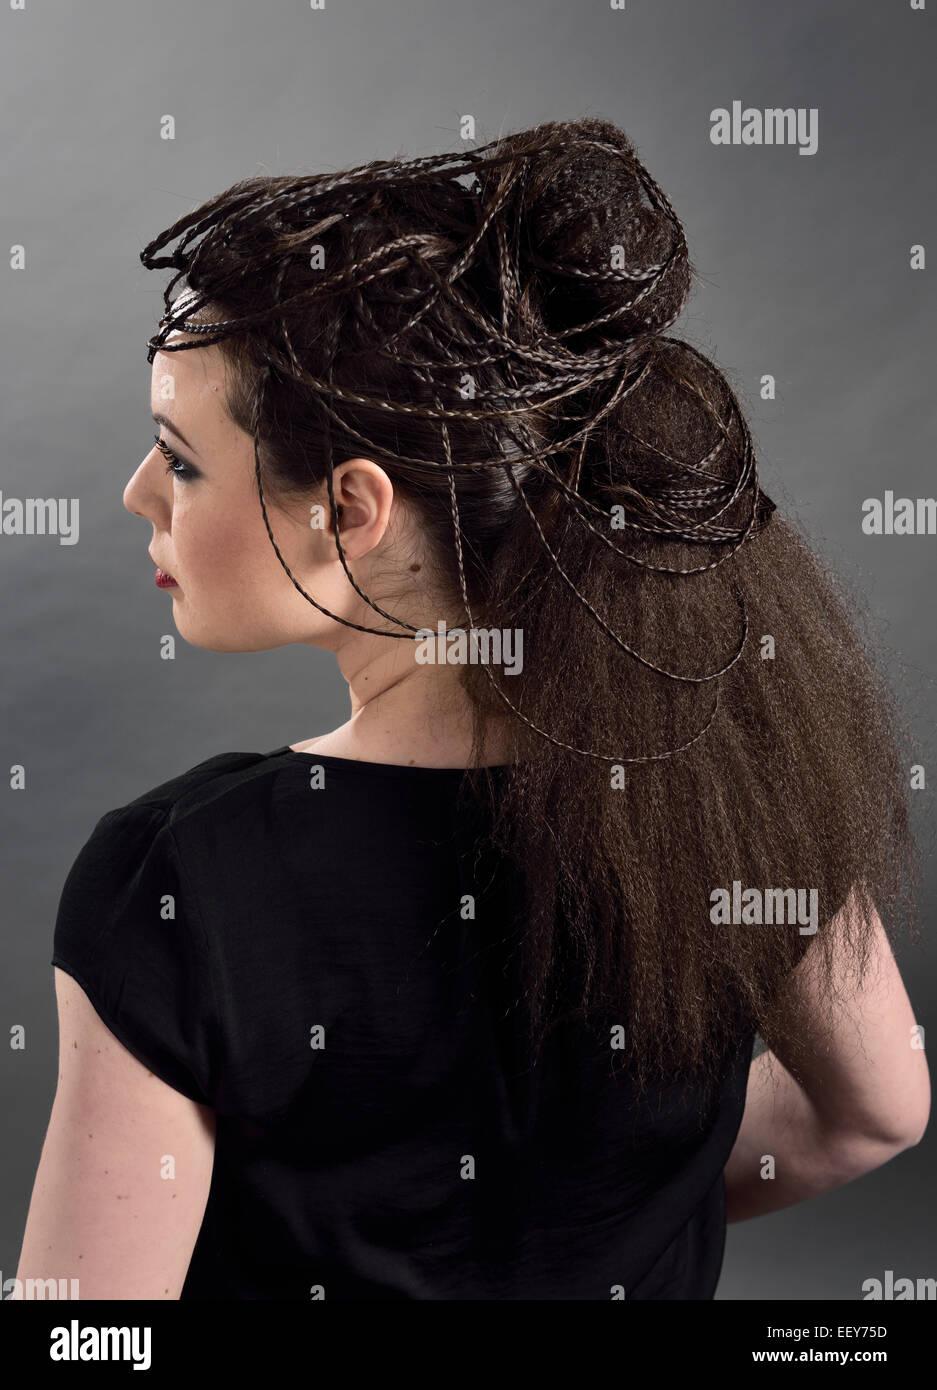 Side view portrait of a young woman with an elaborate hairdo with braids and crimped hair Stock Photo